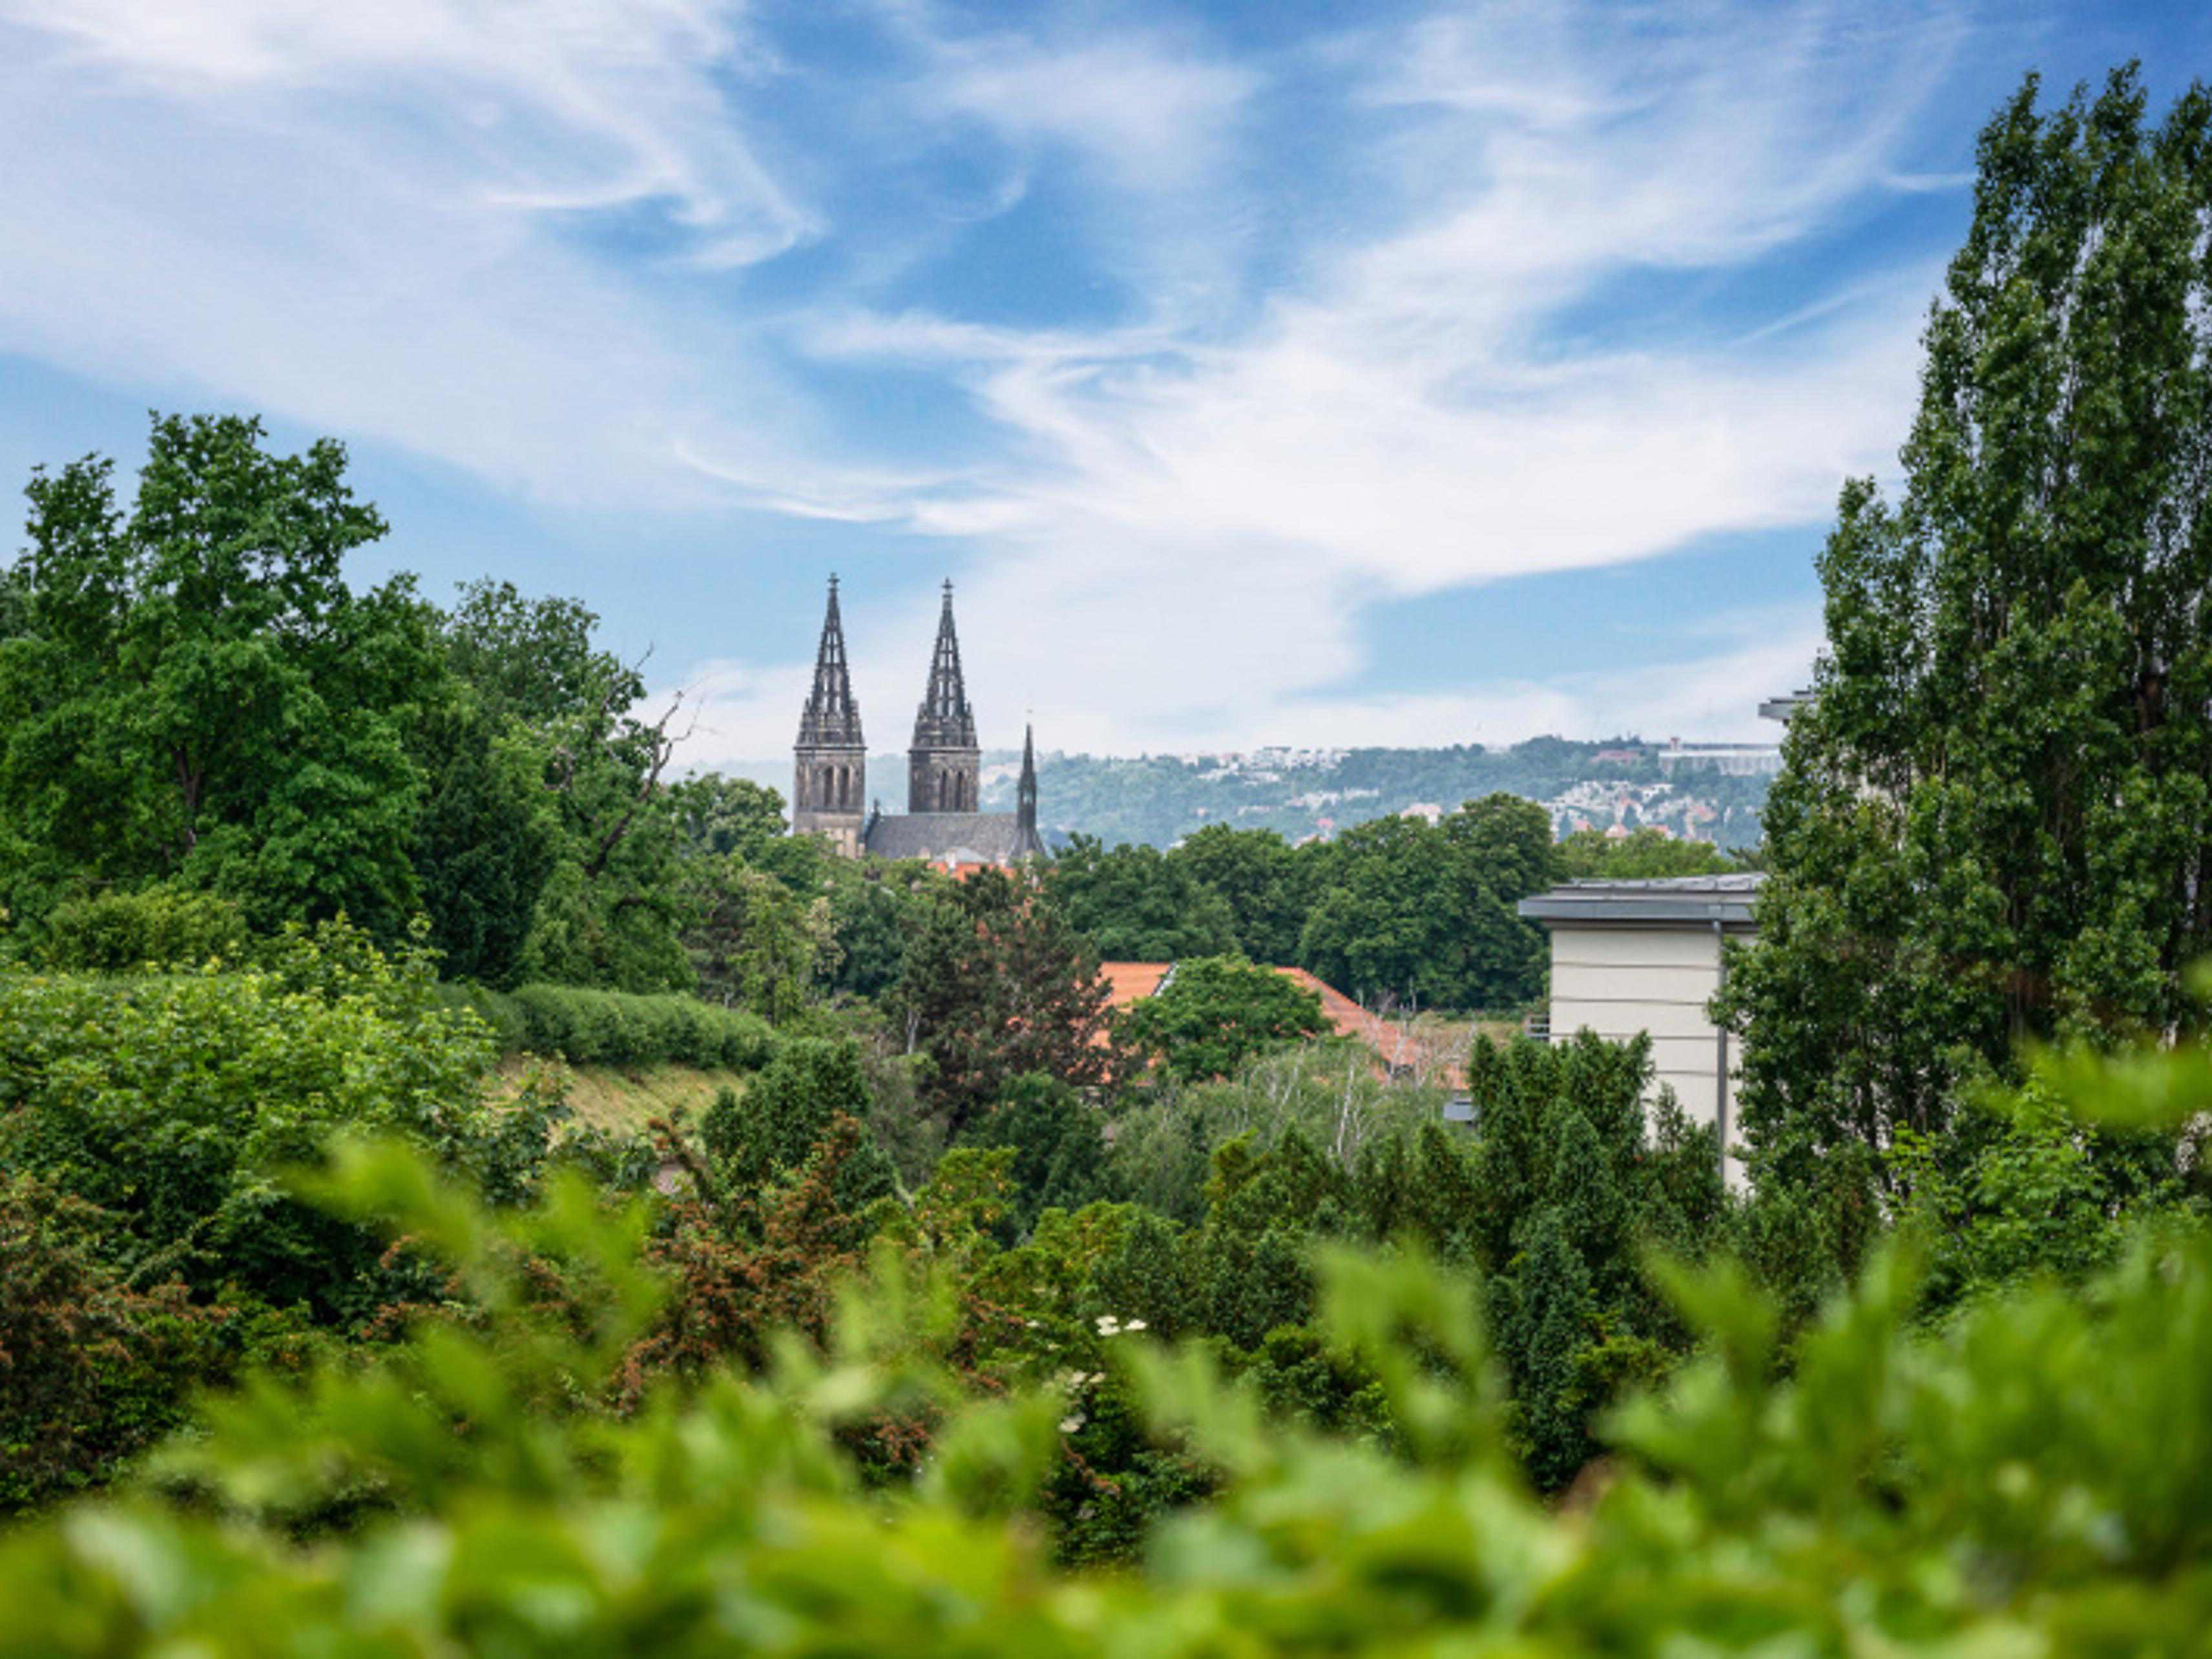 Hotel garden with view of Vysehrad Castle